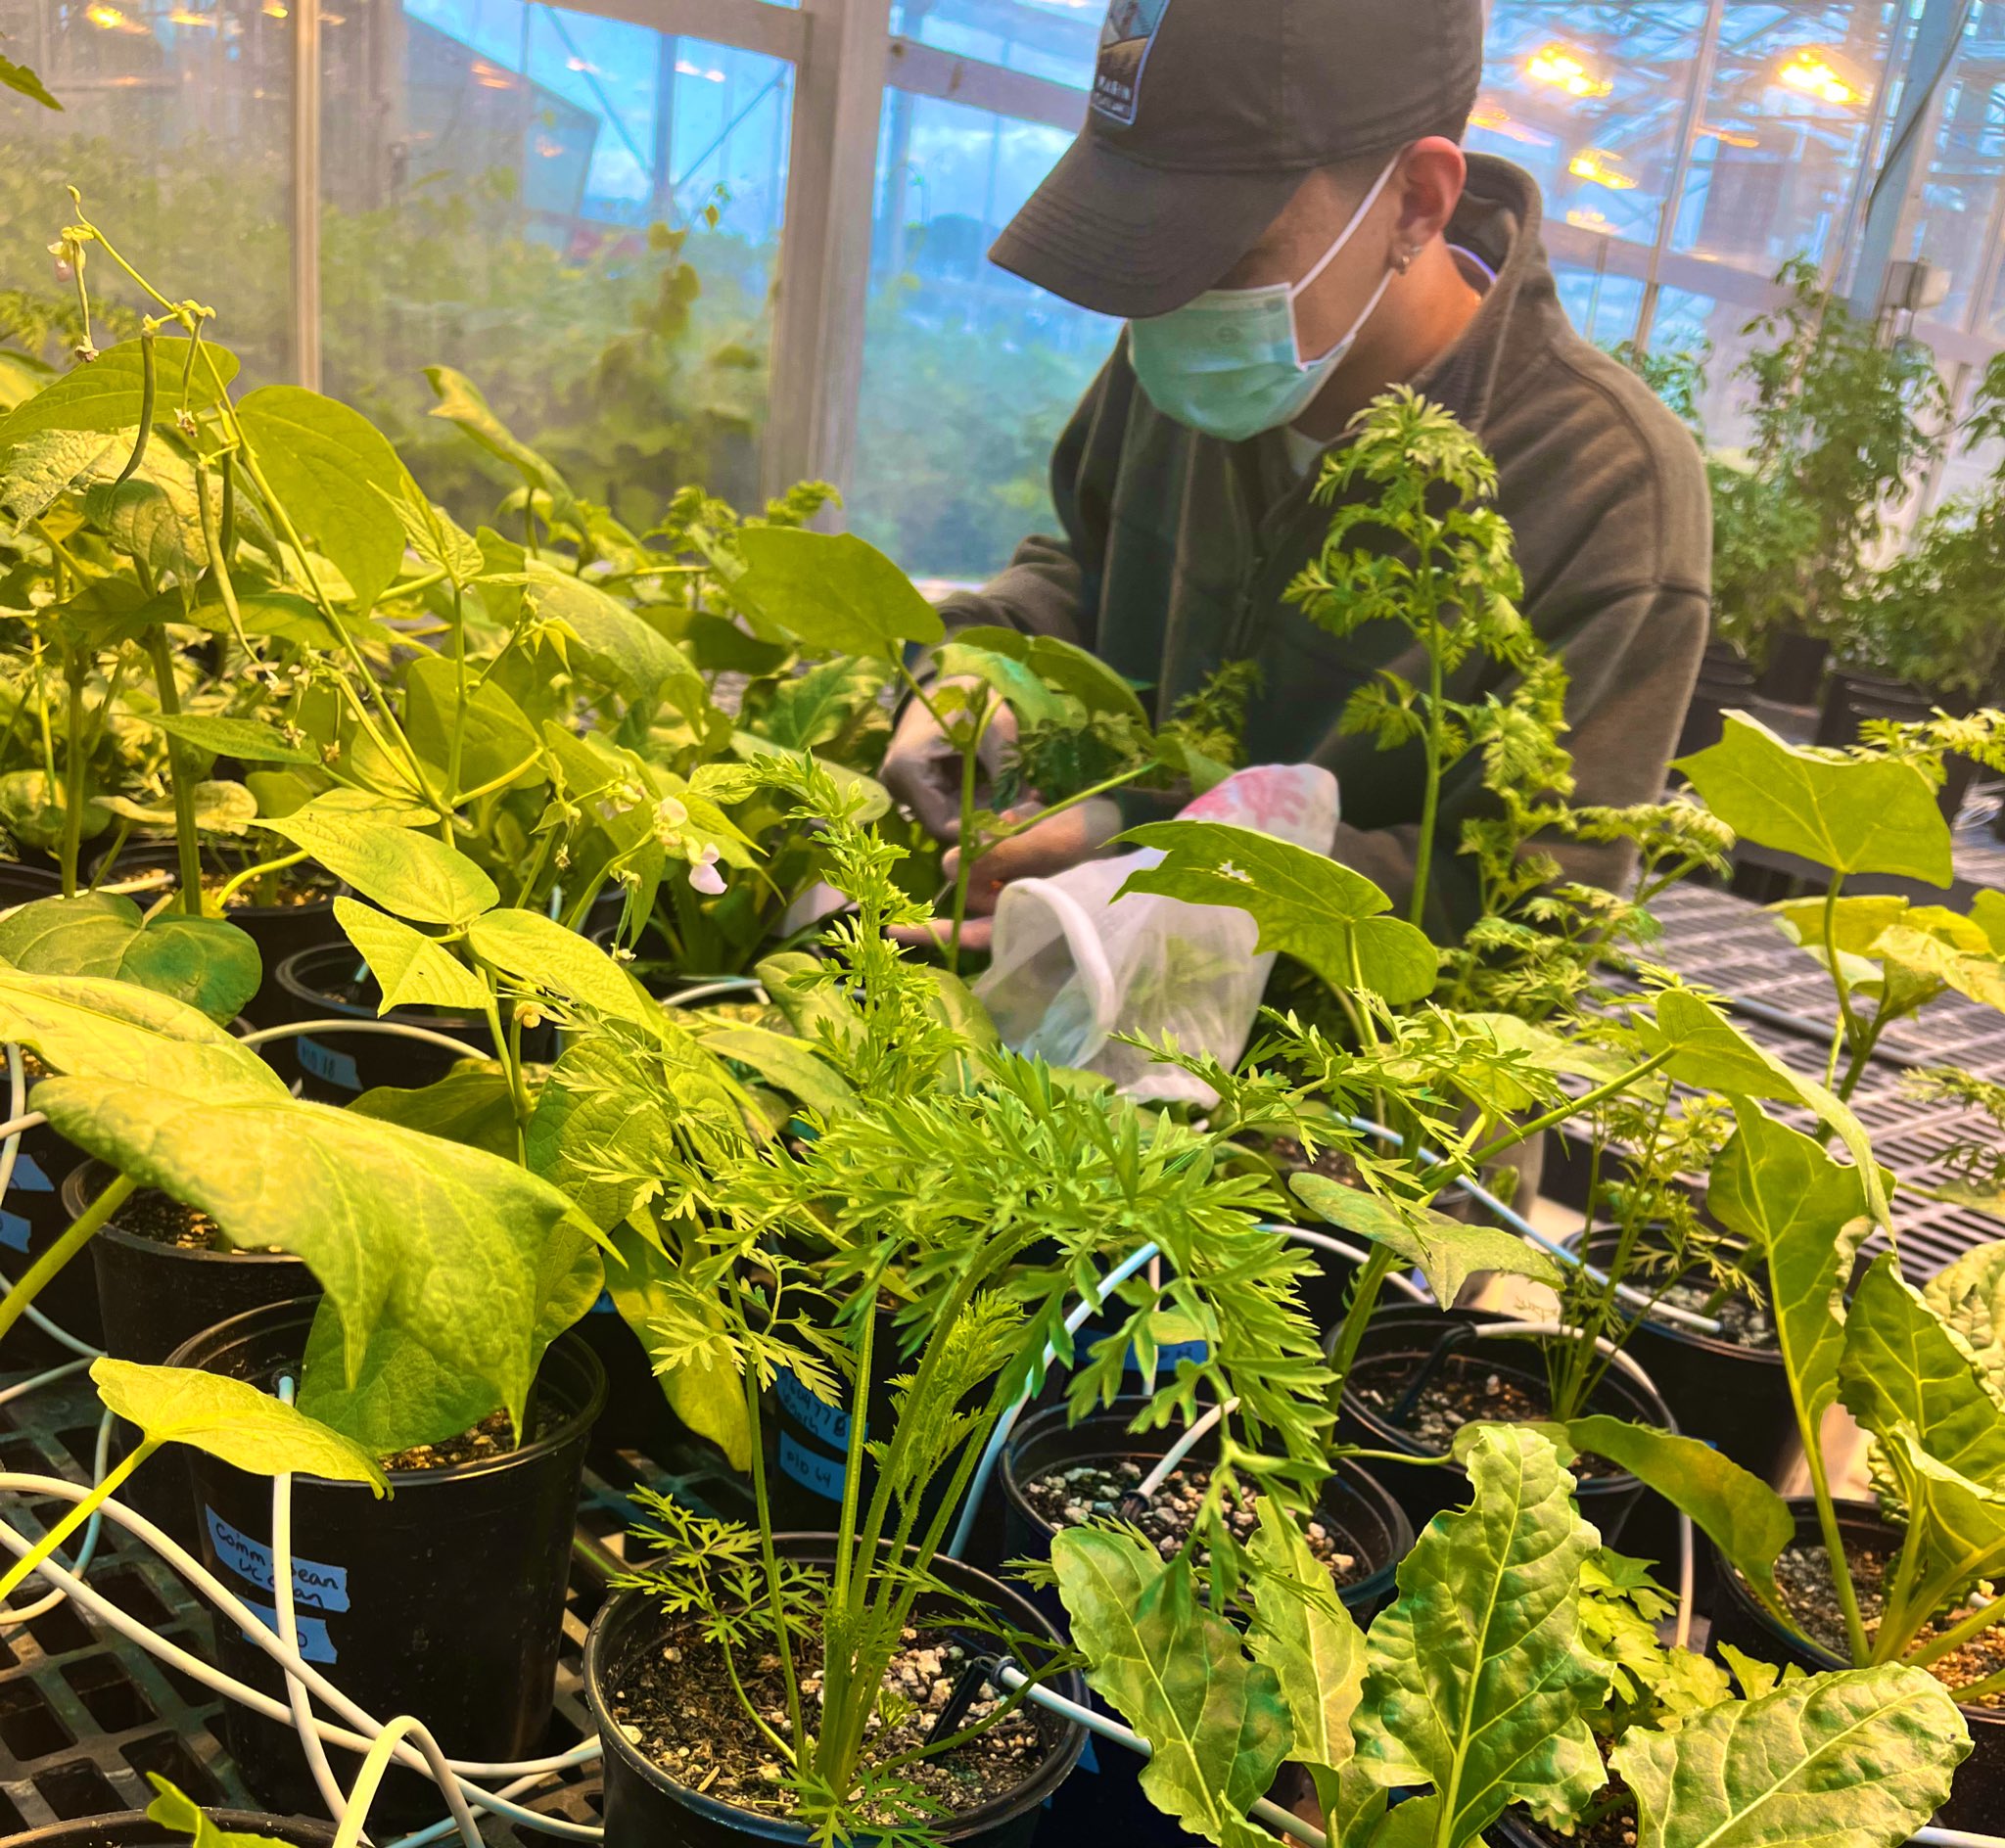 A student wearing a cap and a mask working in the green house with diverse plants in the forground